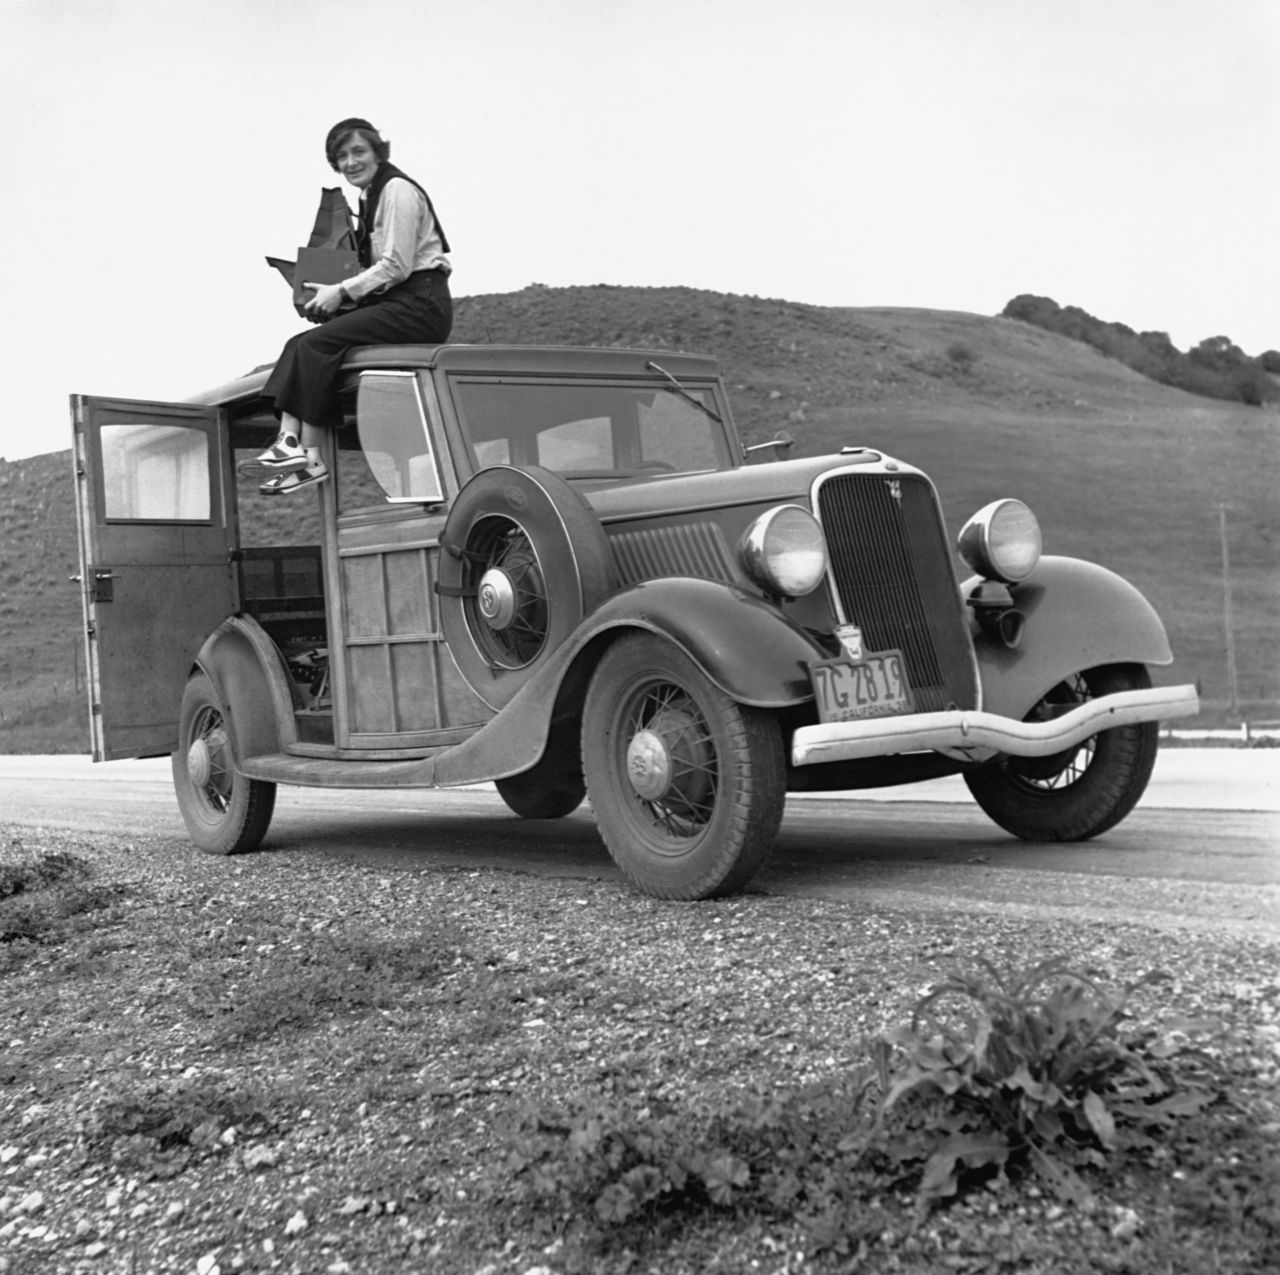 Dorothea Lange holds her camera on the roof of a car in the 1930s. She is famous for her photos of people who were hit hard by the Great Depression. "Migrant Mother," Lange's photo of laborer Florence Owens Thompson, is one of the era's most iconic shots. At the time, Lange was working as a photographer for the Resettlement Administration, a government agency looking to raise public awareness about struggling farmers.